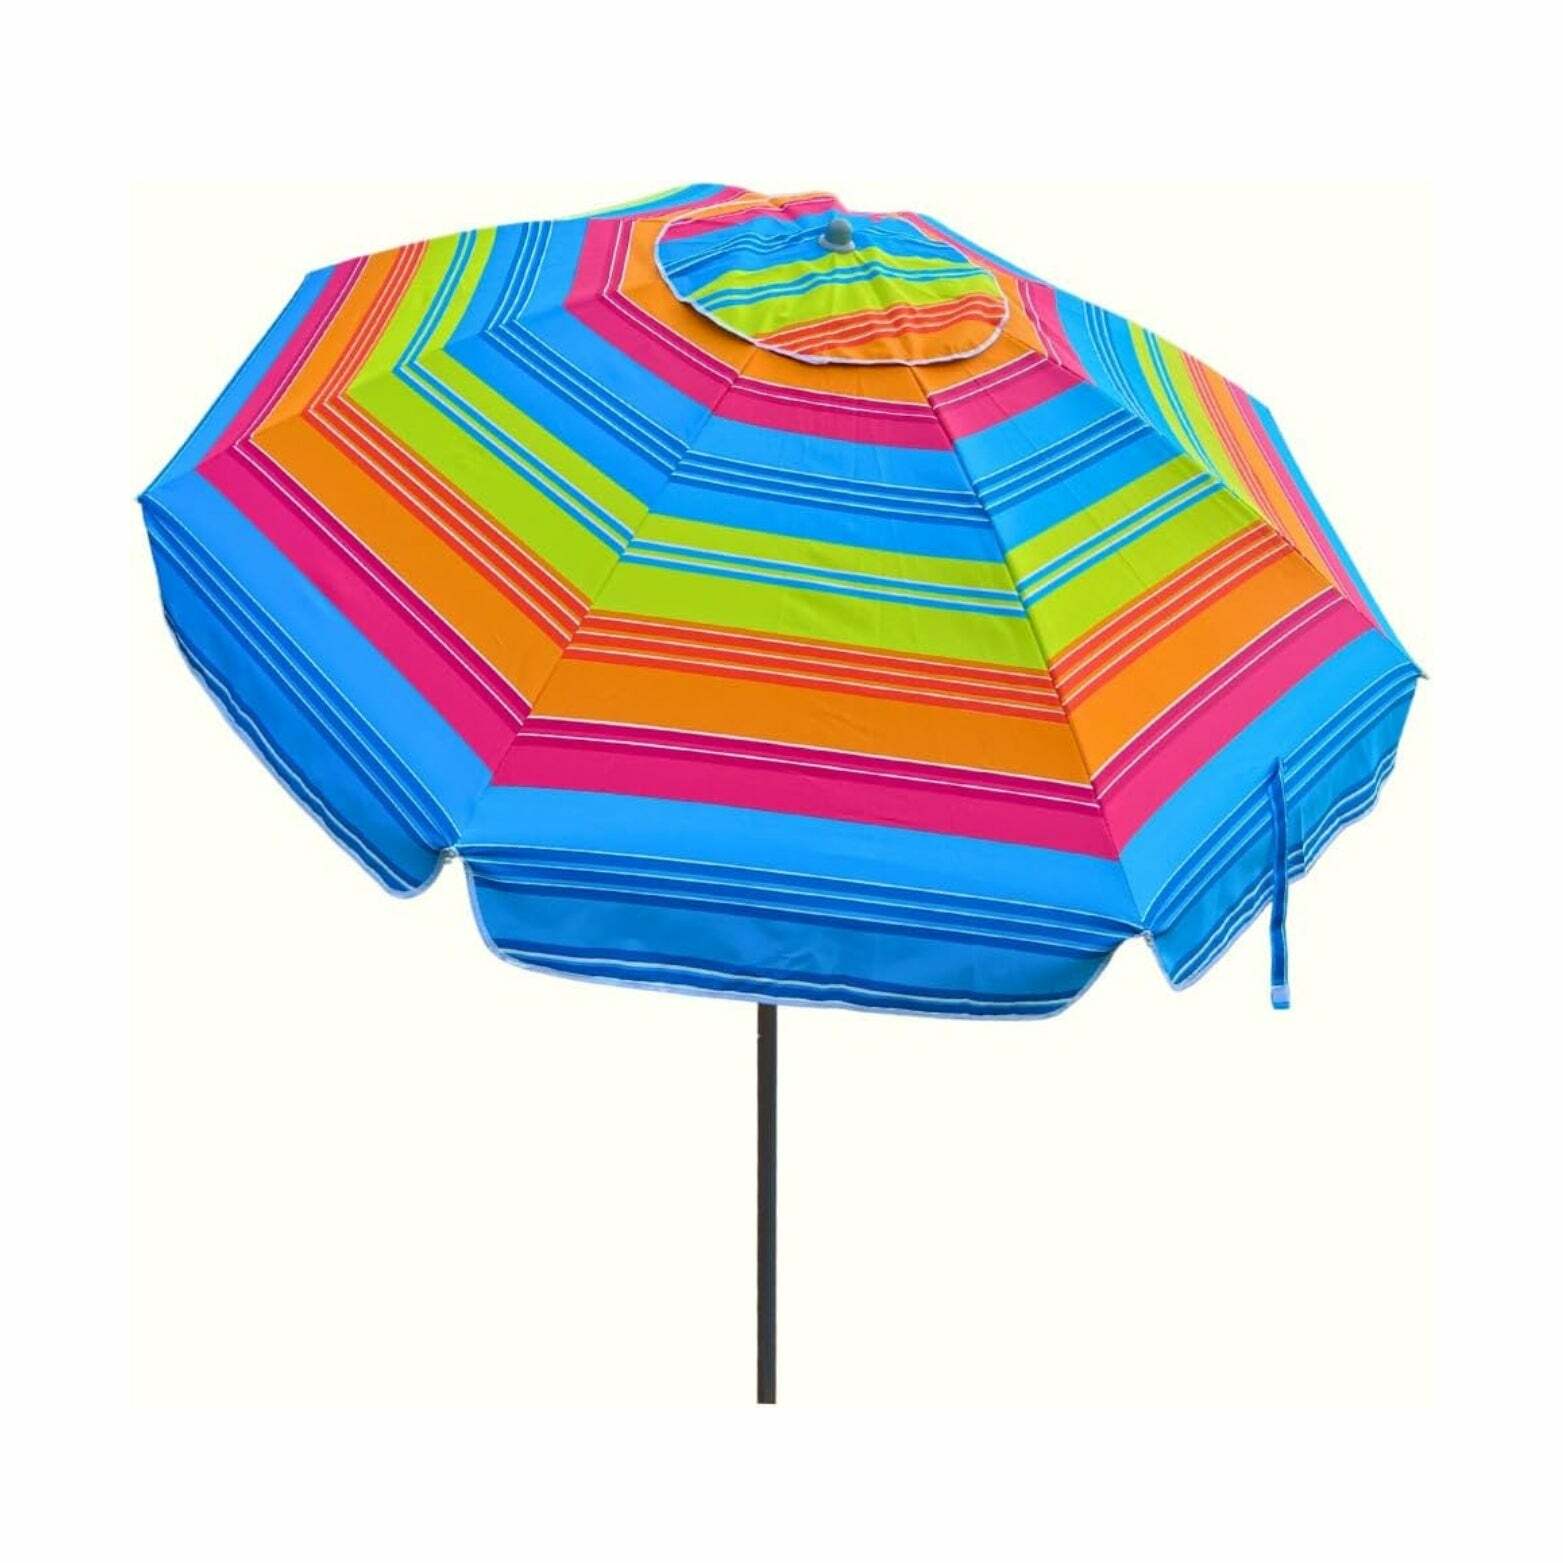 ROFFT Sturdy Beach Umbrella with UV Protection and Windproof Design - 6.5 Ft Coverage, Steel & Aluminum Pole, Tilt Adjustment- Multicolor